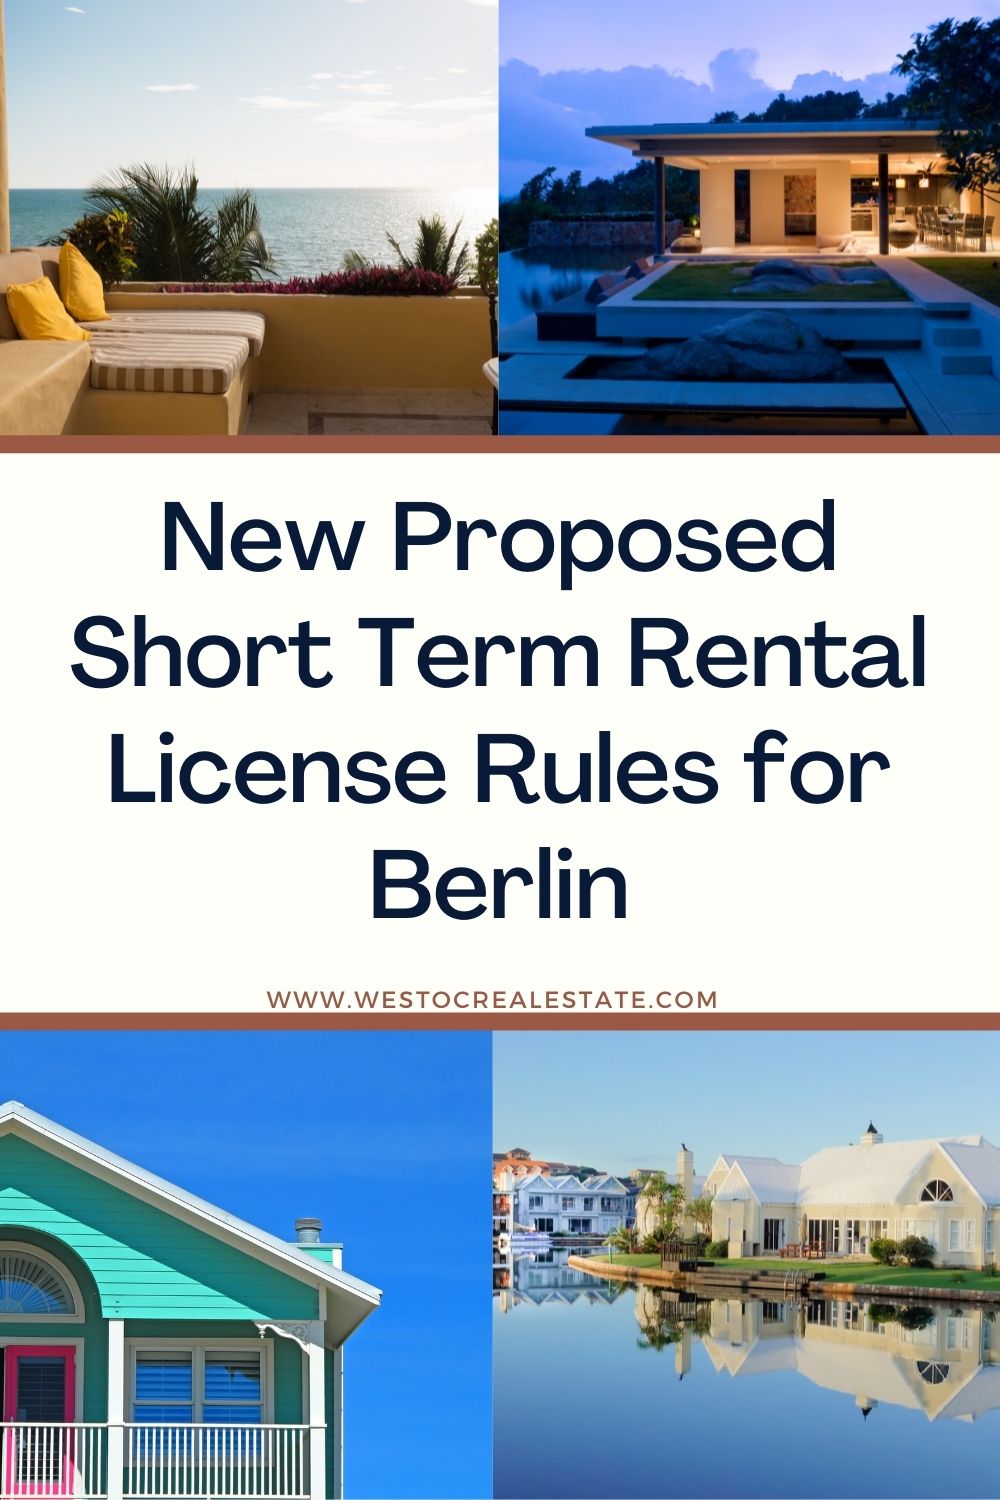 New Proposed Short Term Rental License Rules for Berlin